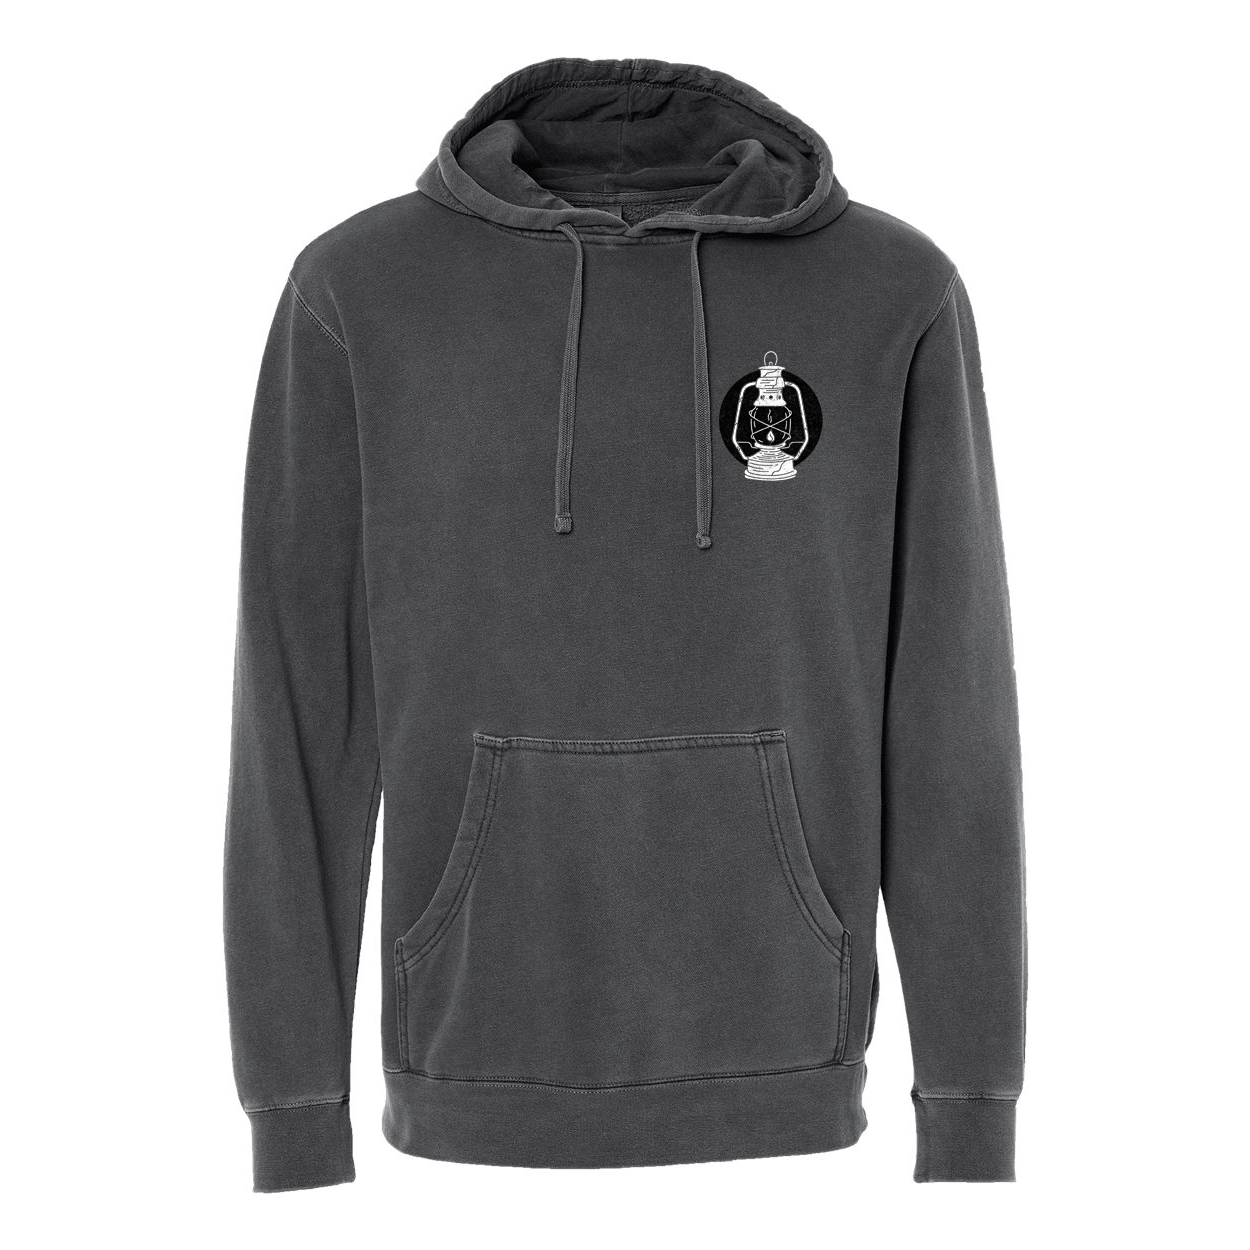 Spectacular NY Hoodie - Charcoal